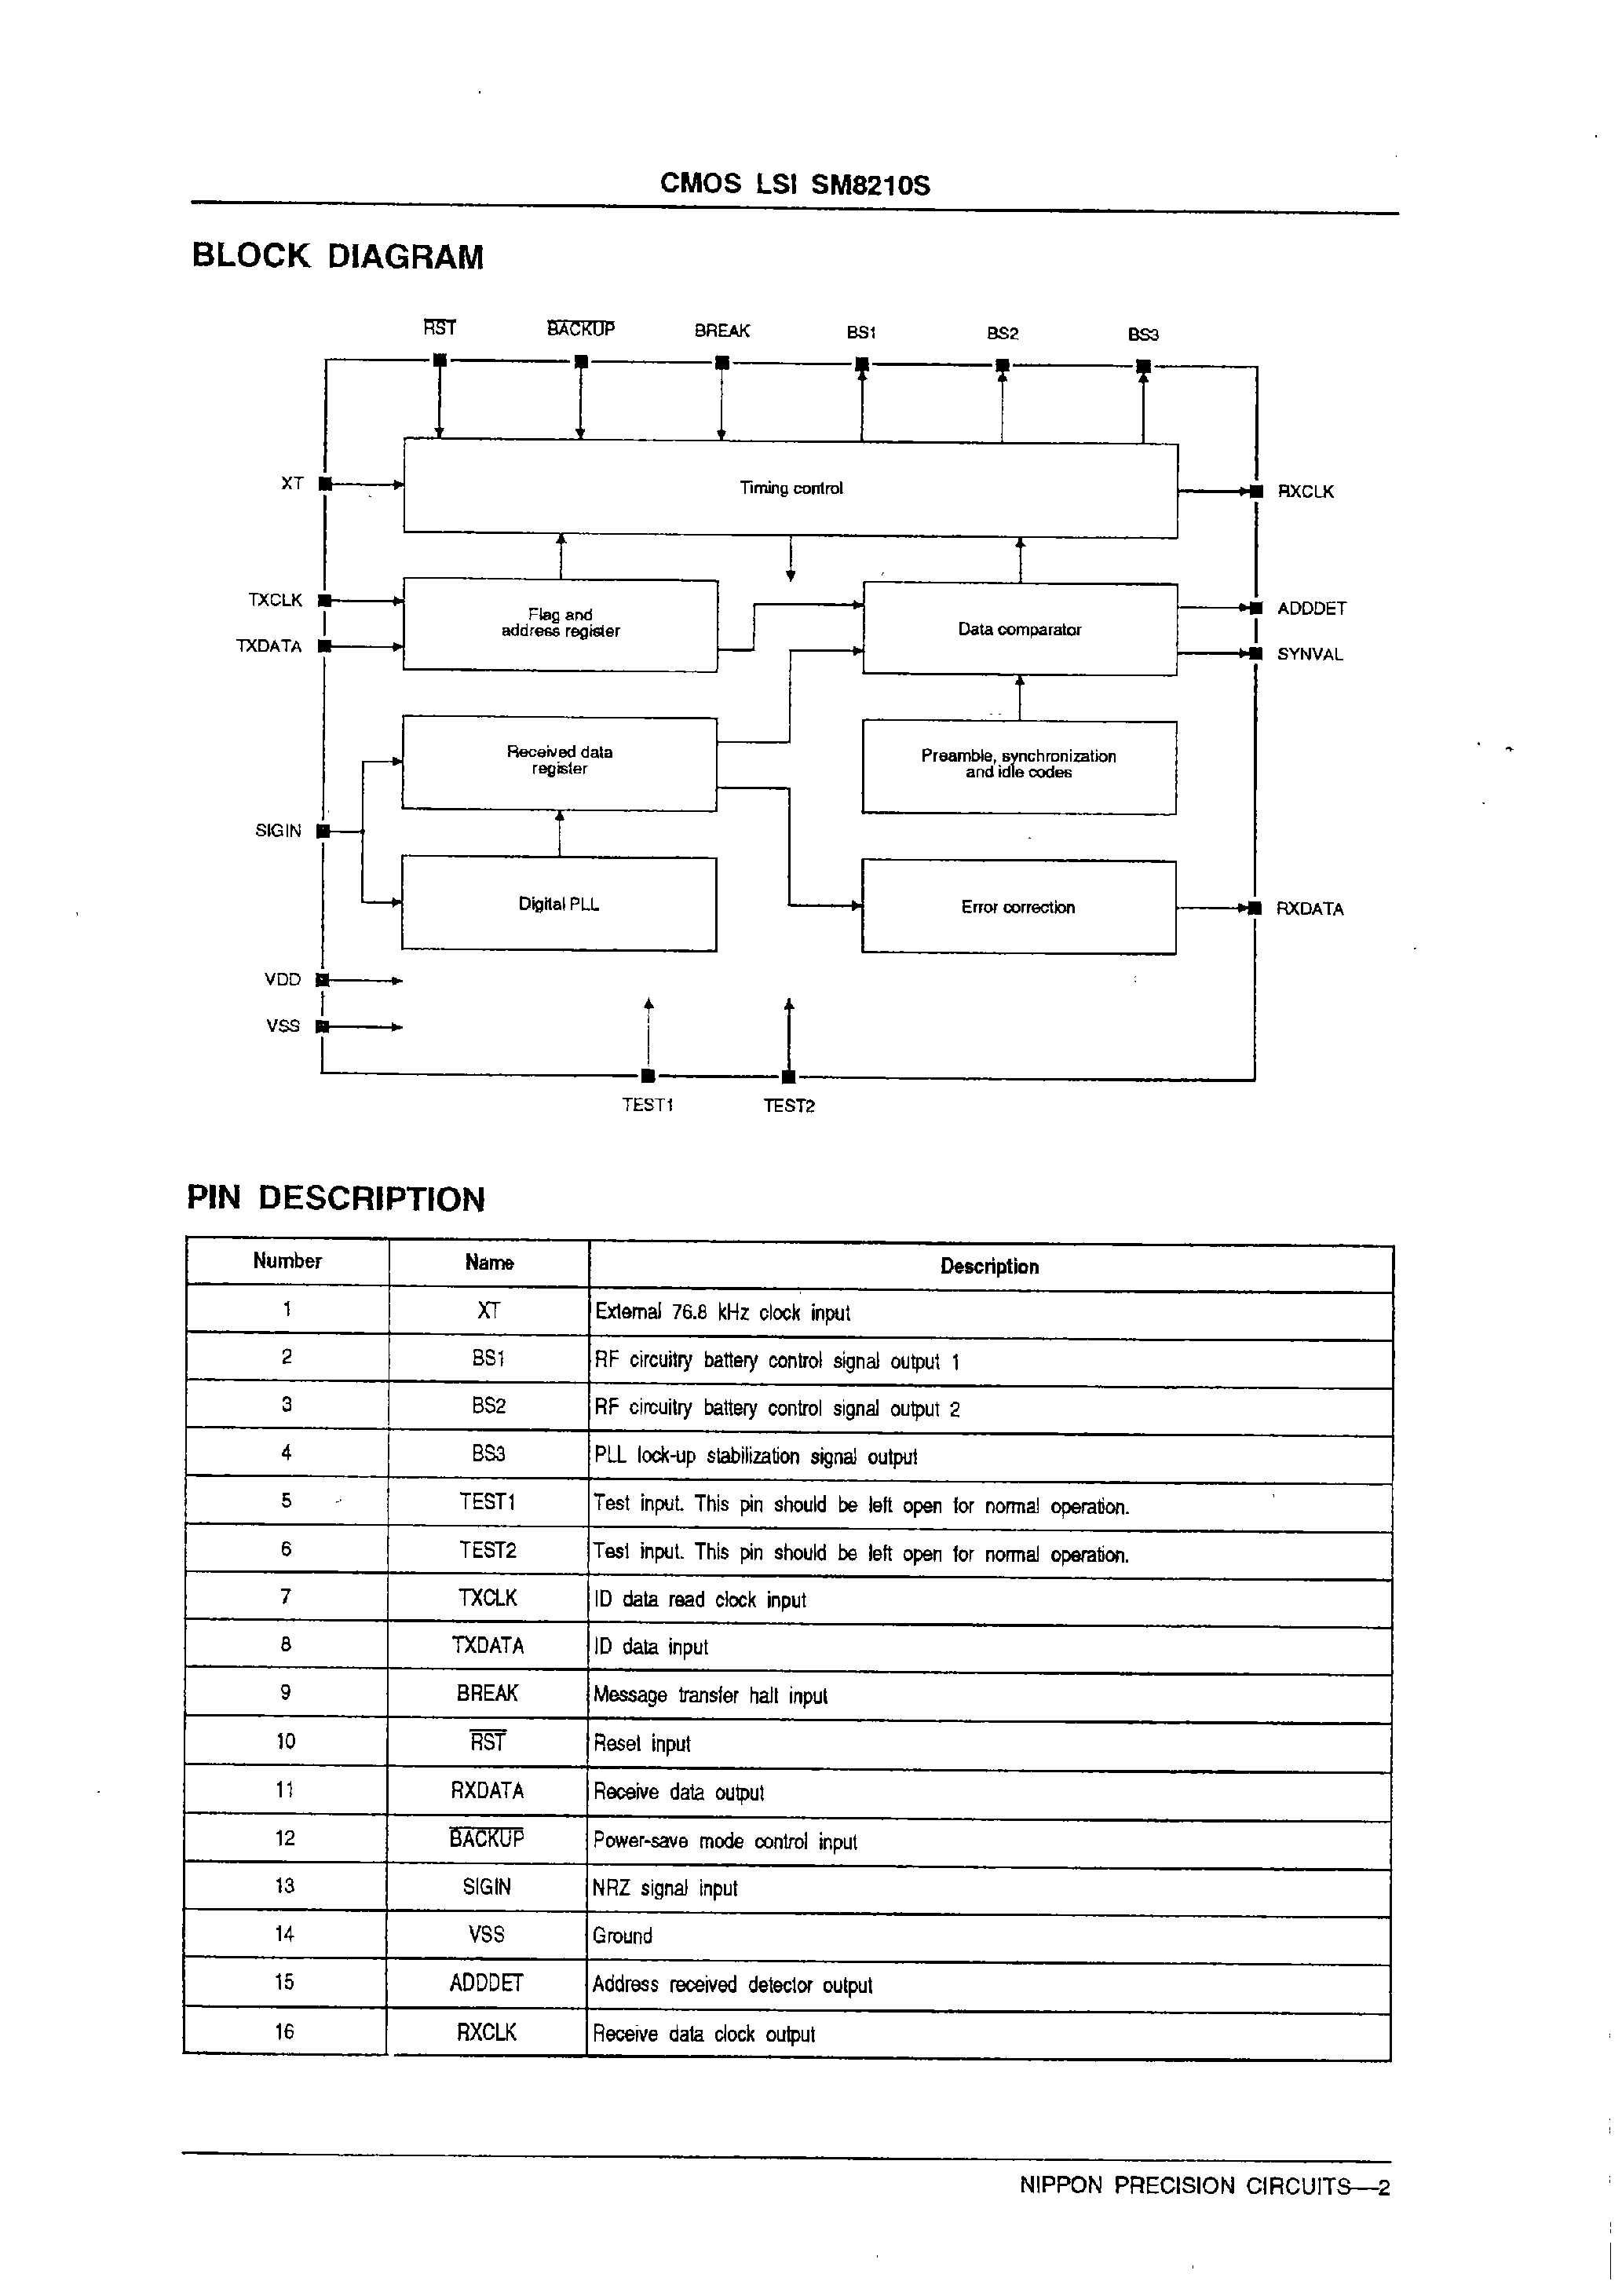 Datasheet SM8210S - Signal Processor for Paging Receivers page 2